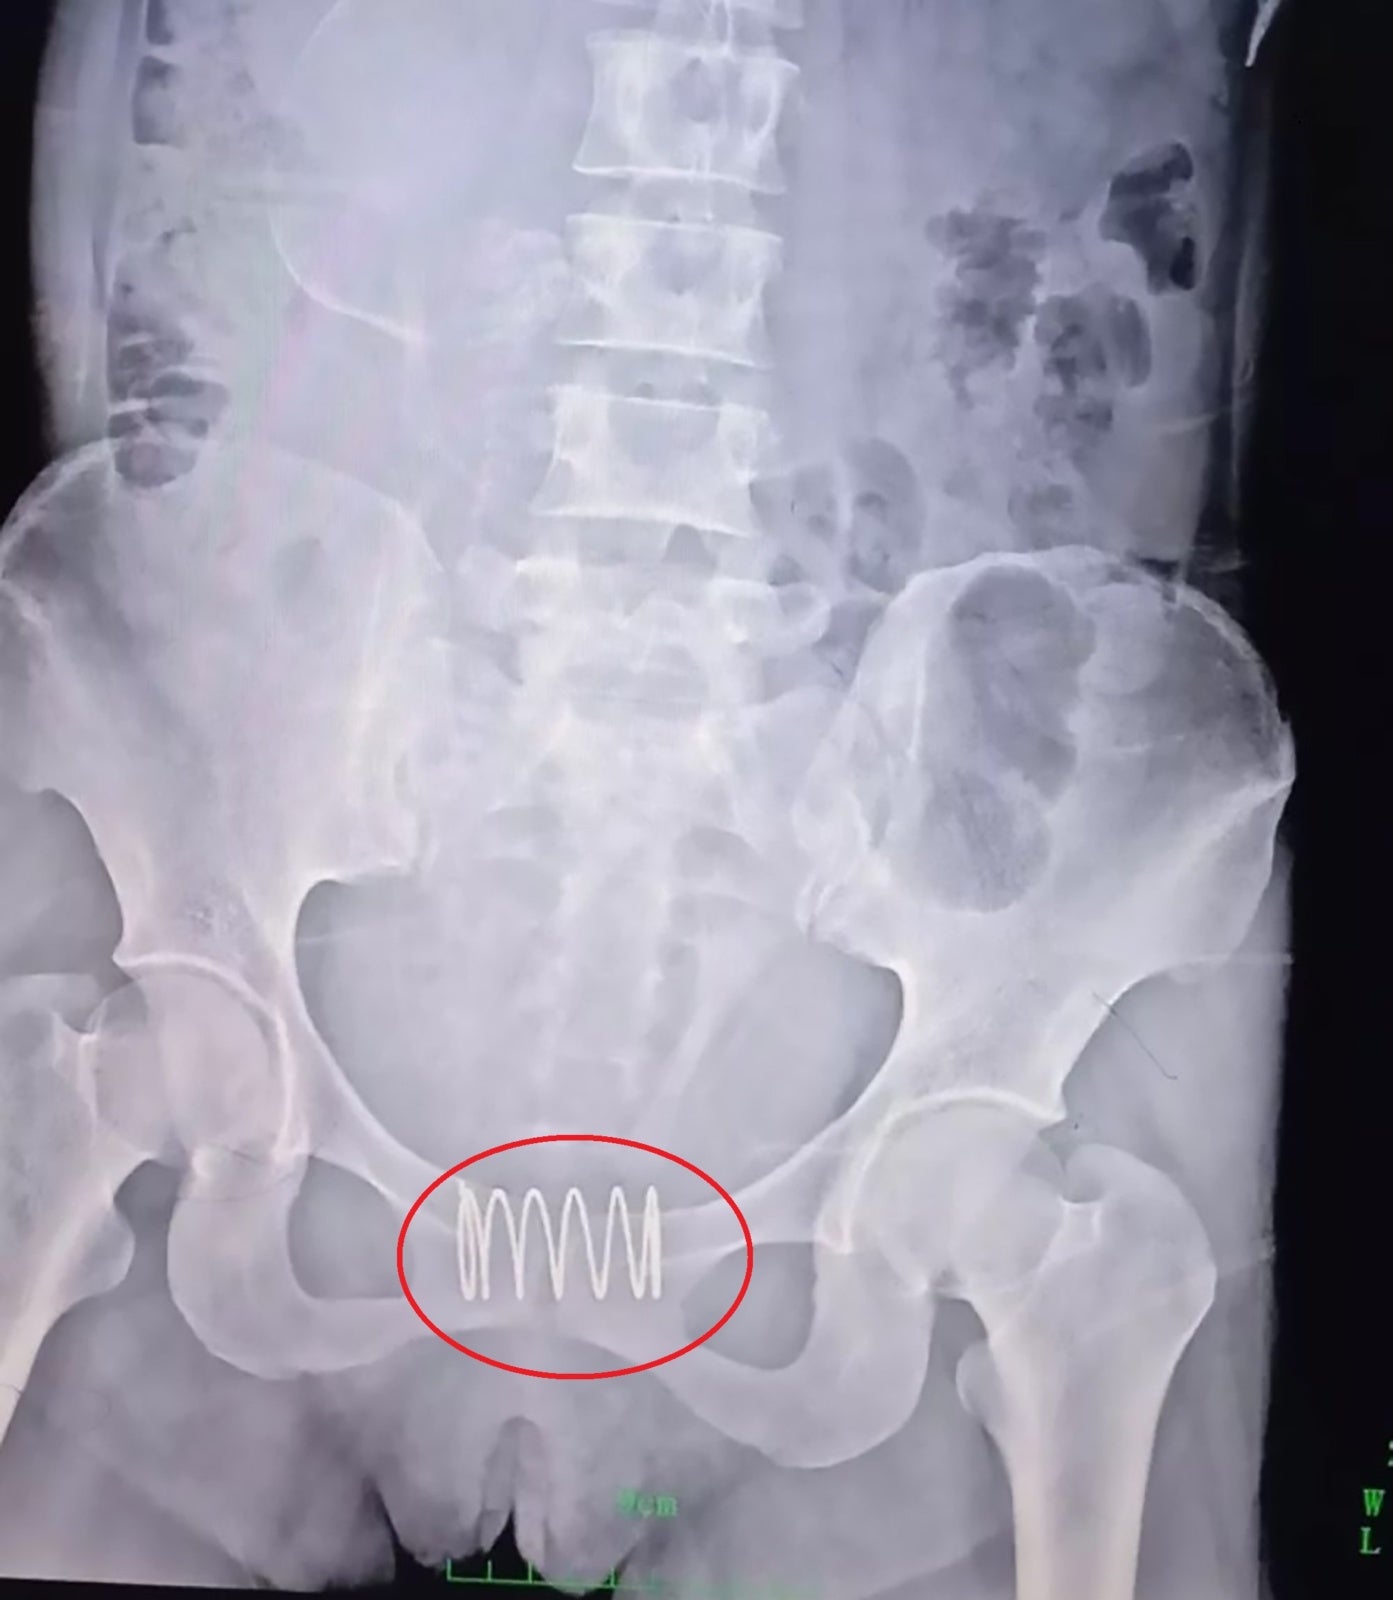 31yo Mother Inserts Metal Spring Into Her Vagina So That She Wouldn't Get Pregnant - WORLD OF BUZZ 3